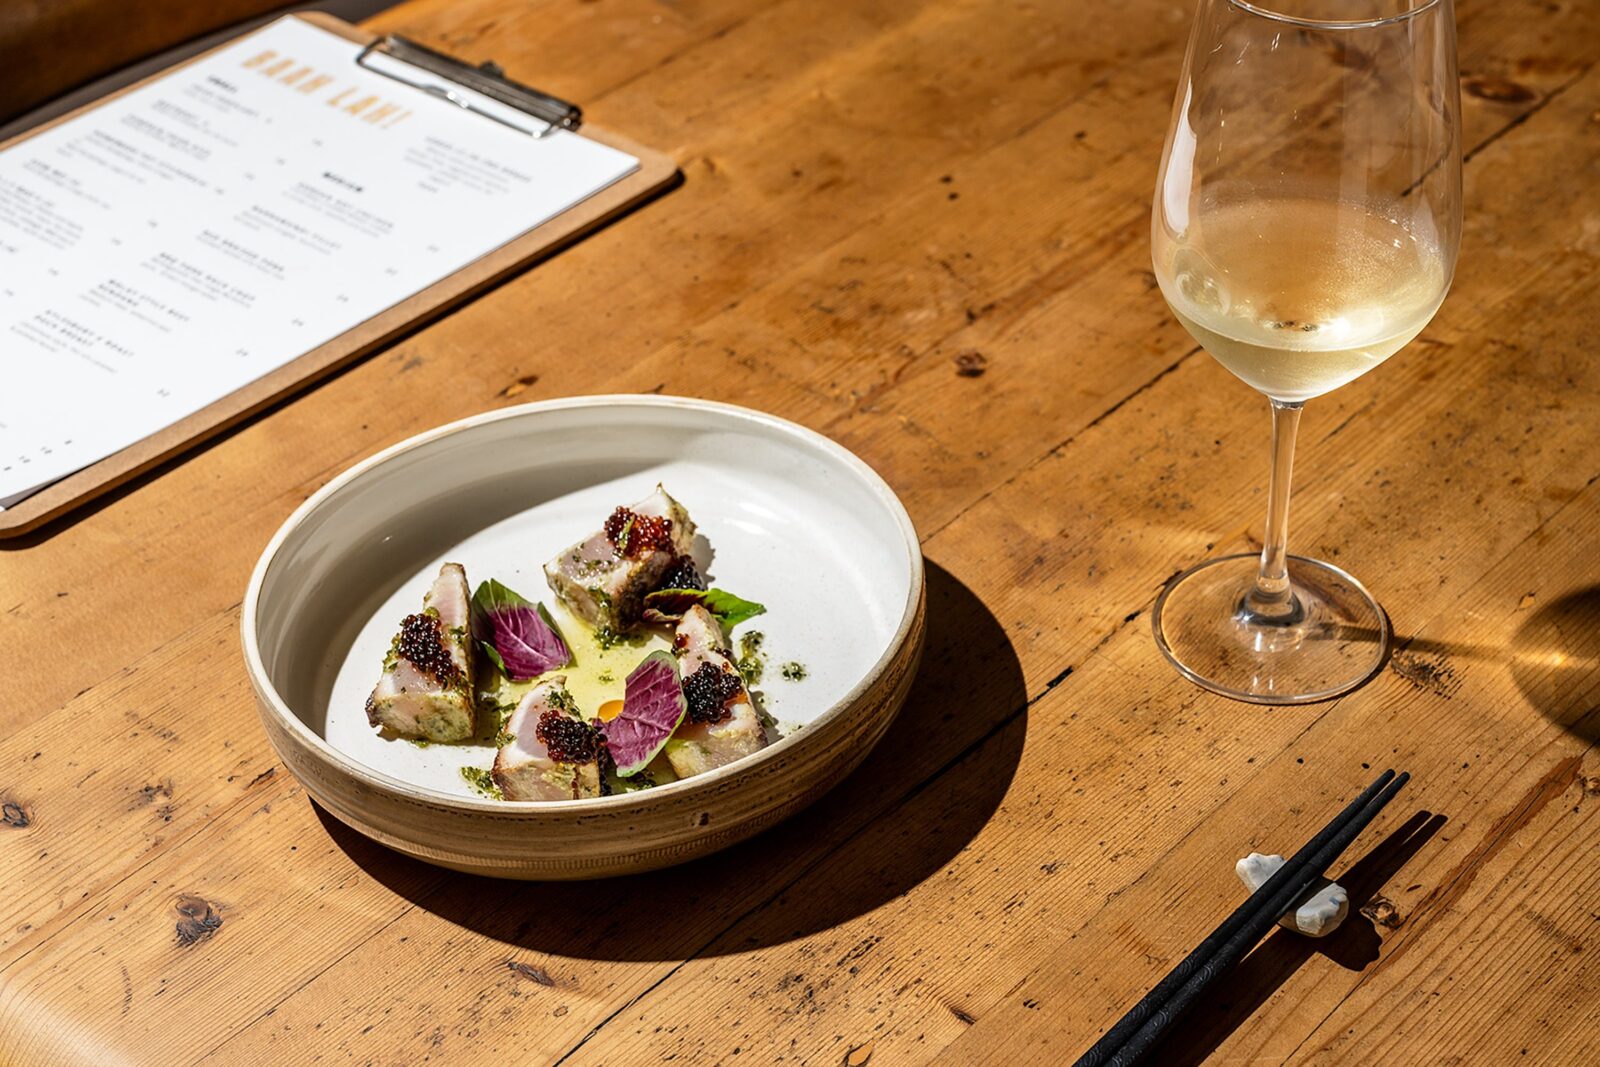 handmade ceramic bowl with seared kingfish pieces inside, a glass of white wine, a menu on table